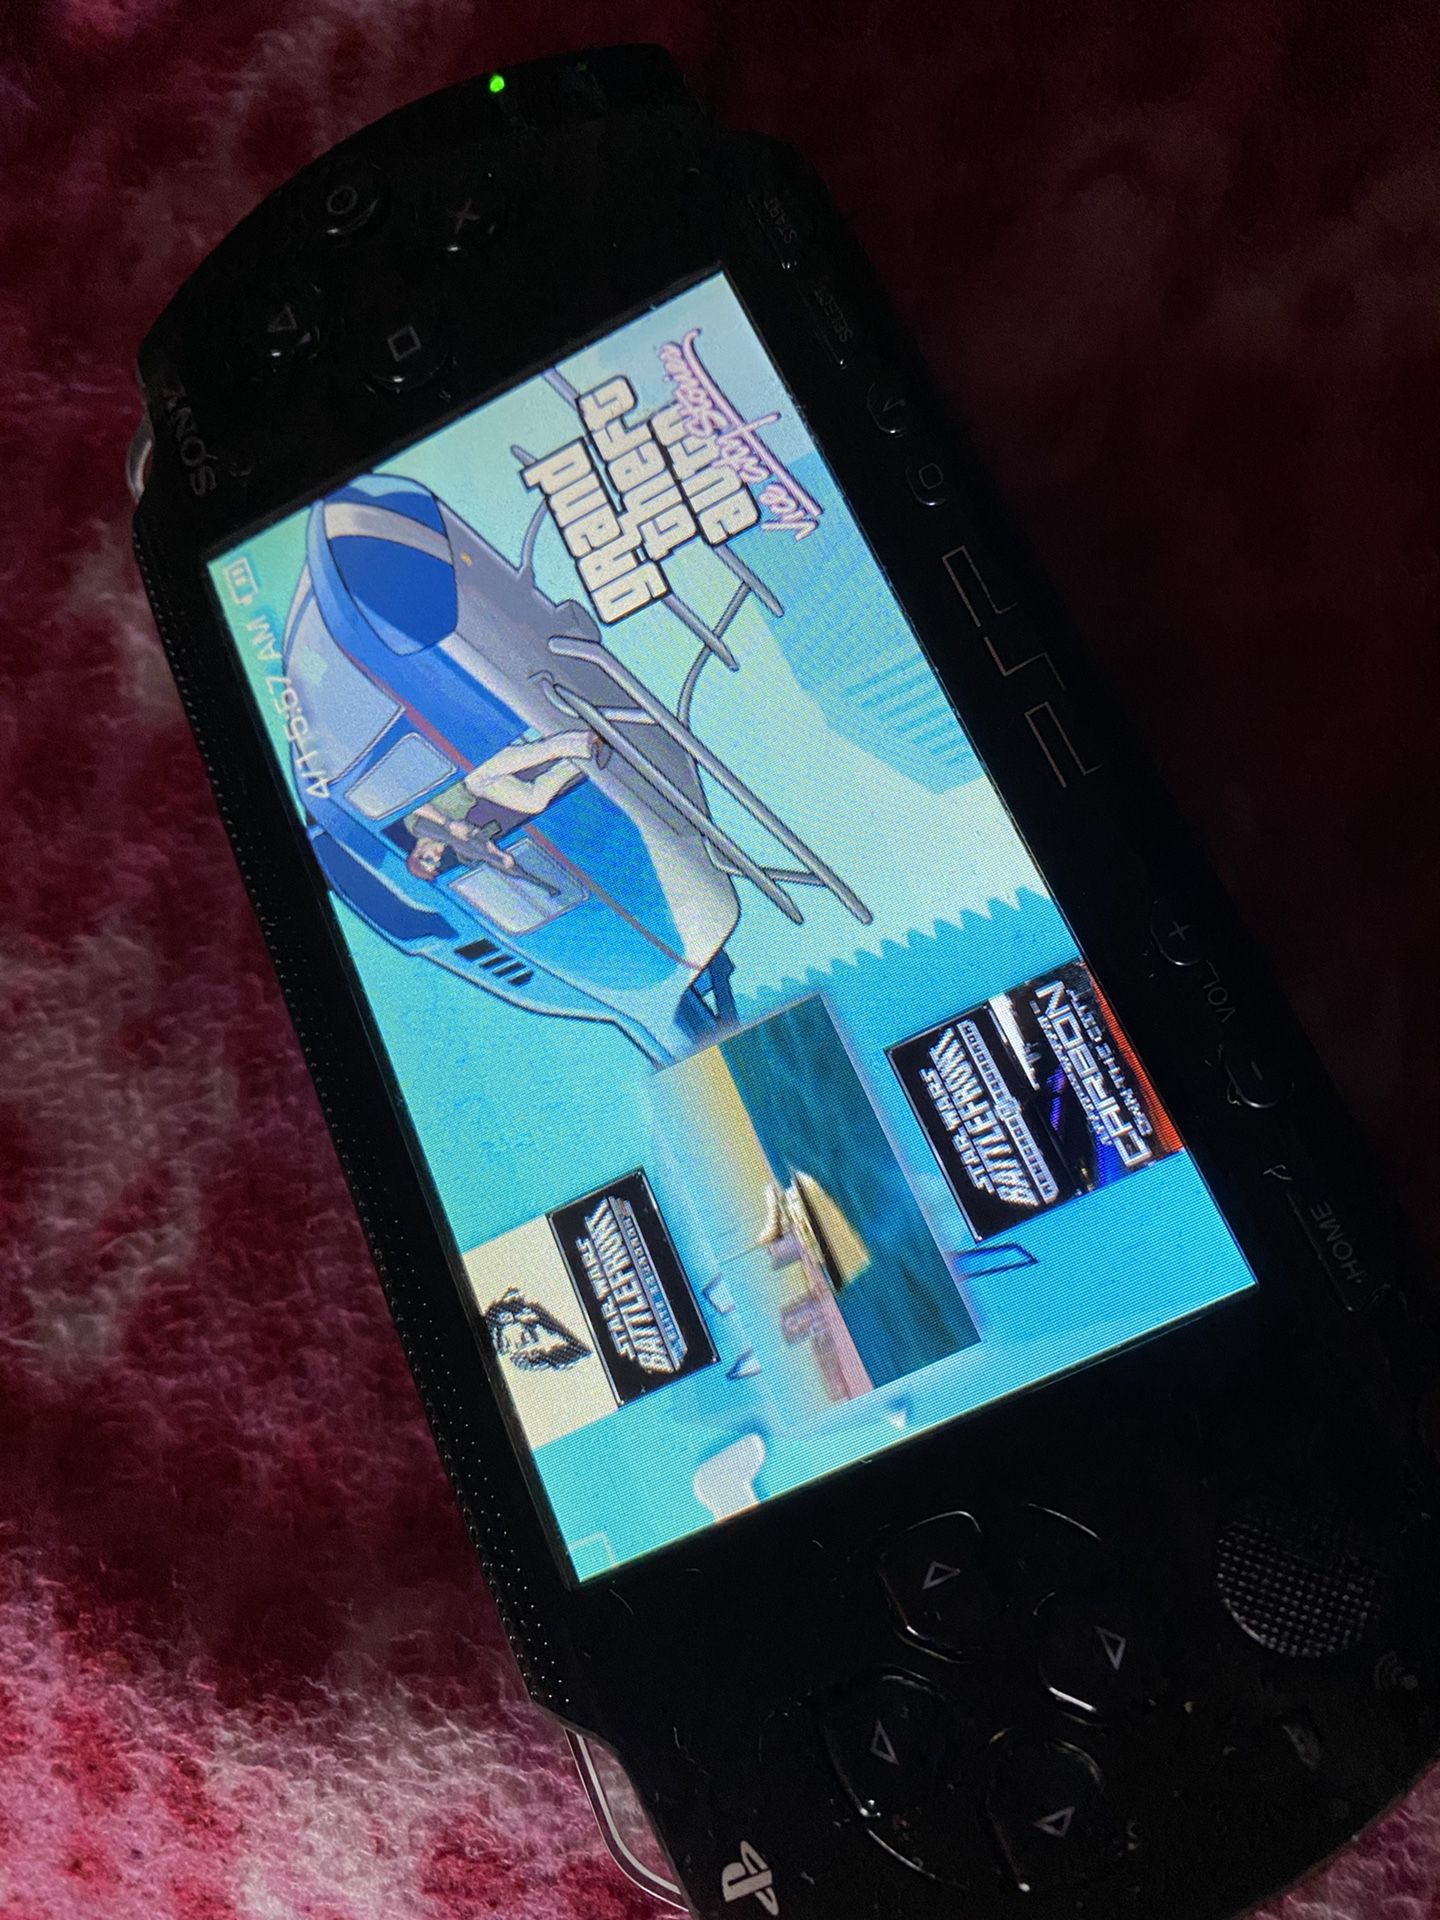 PSP modded with games